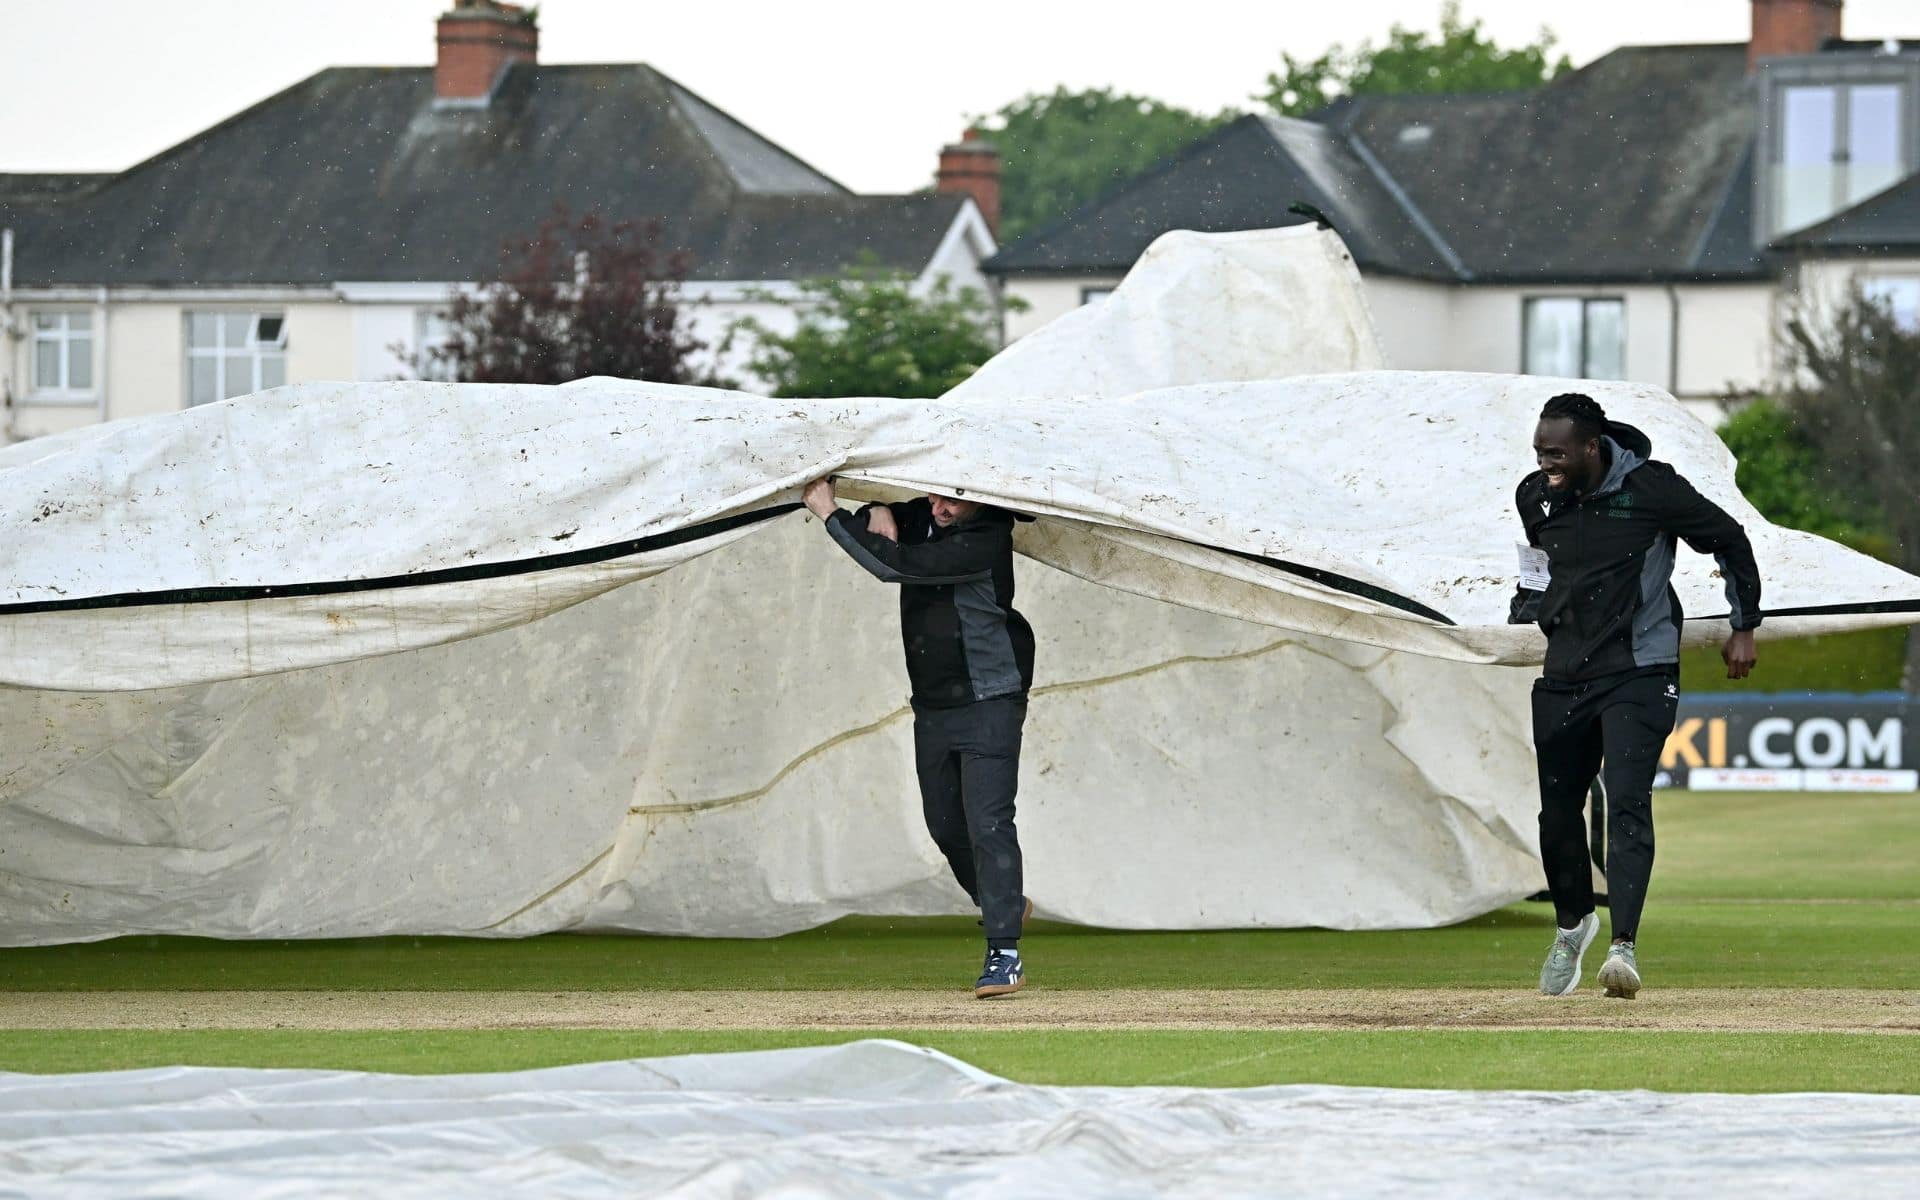 PAK Vs IRE 2nd T20I In Dublin To Be Washed Out? Check Out Latest Weather Report